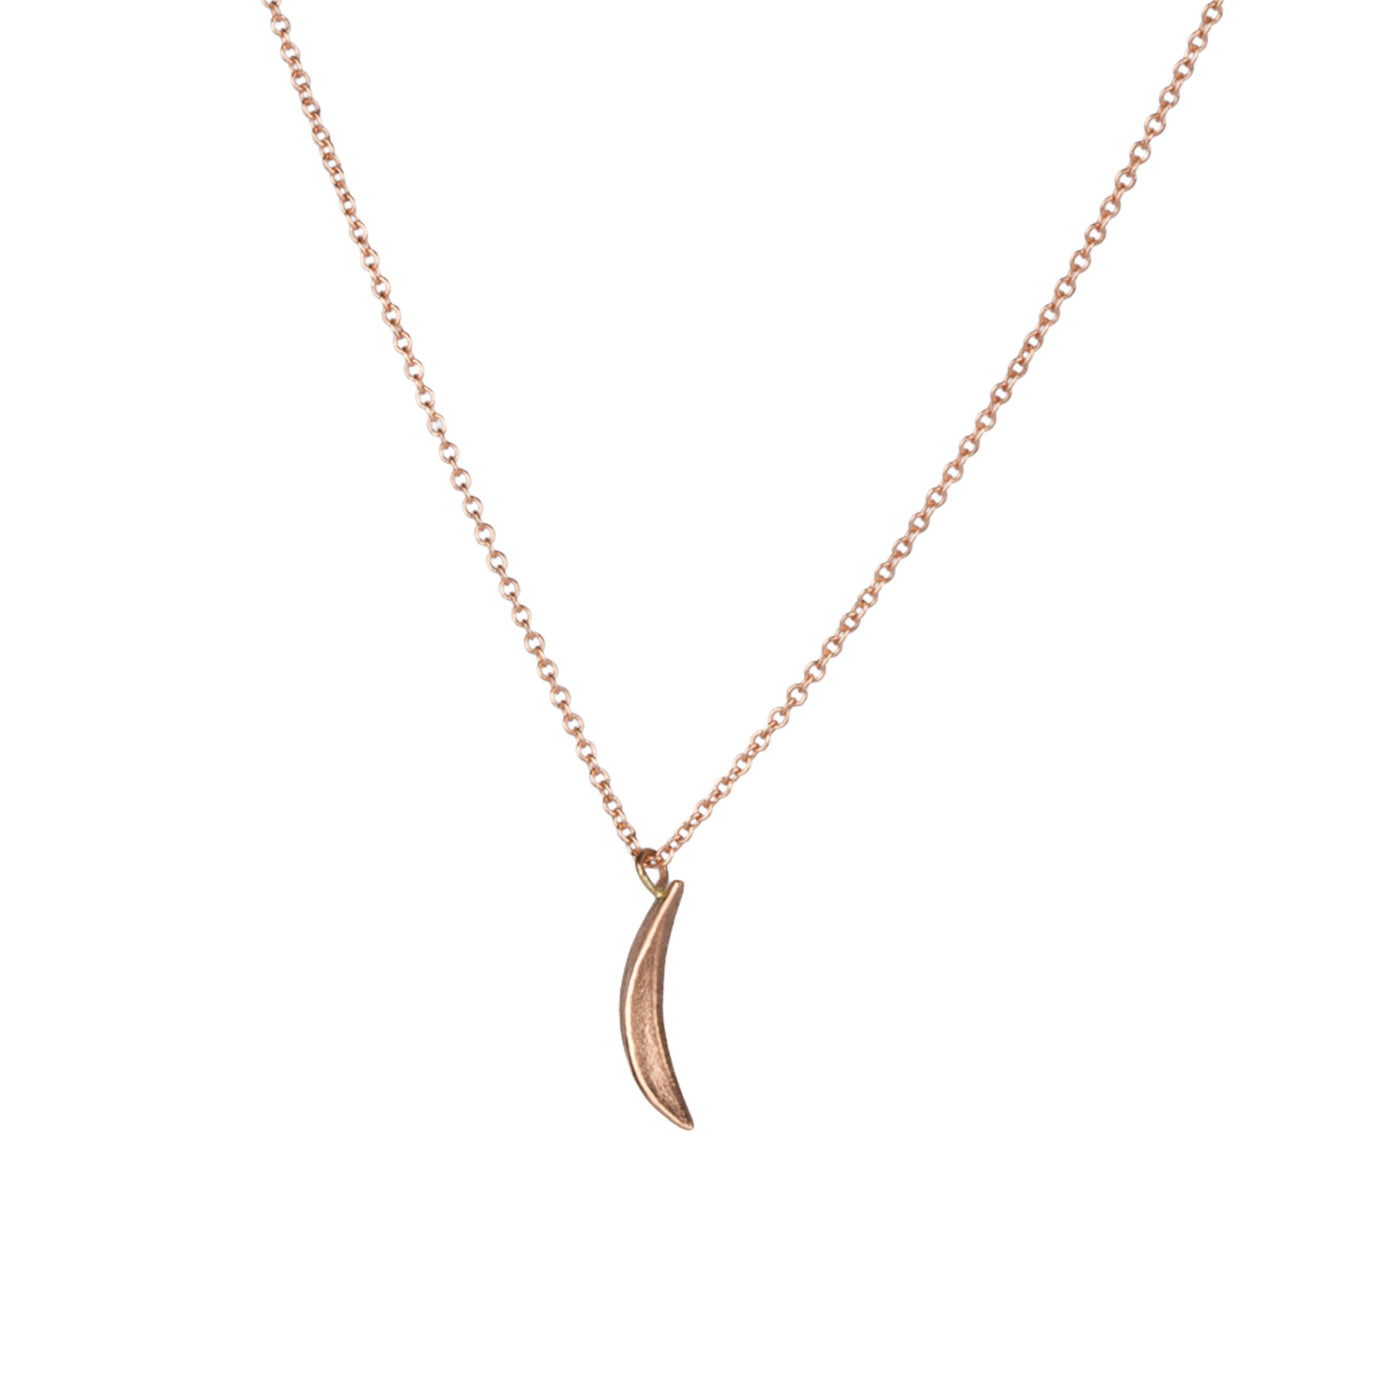 Rose Gold Small Wisp Moon Necklace by Corey Egan side view on a white background